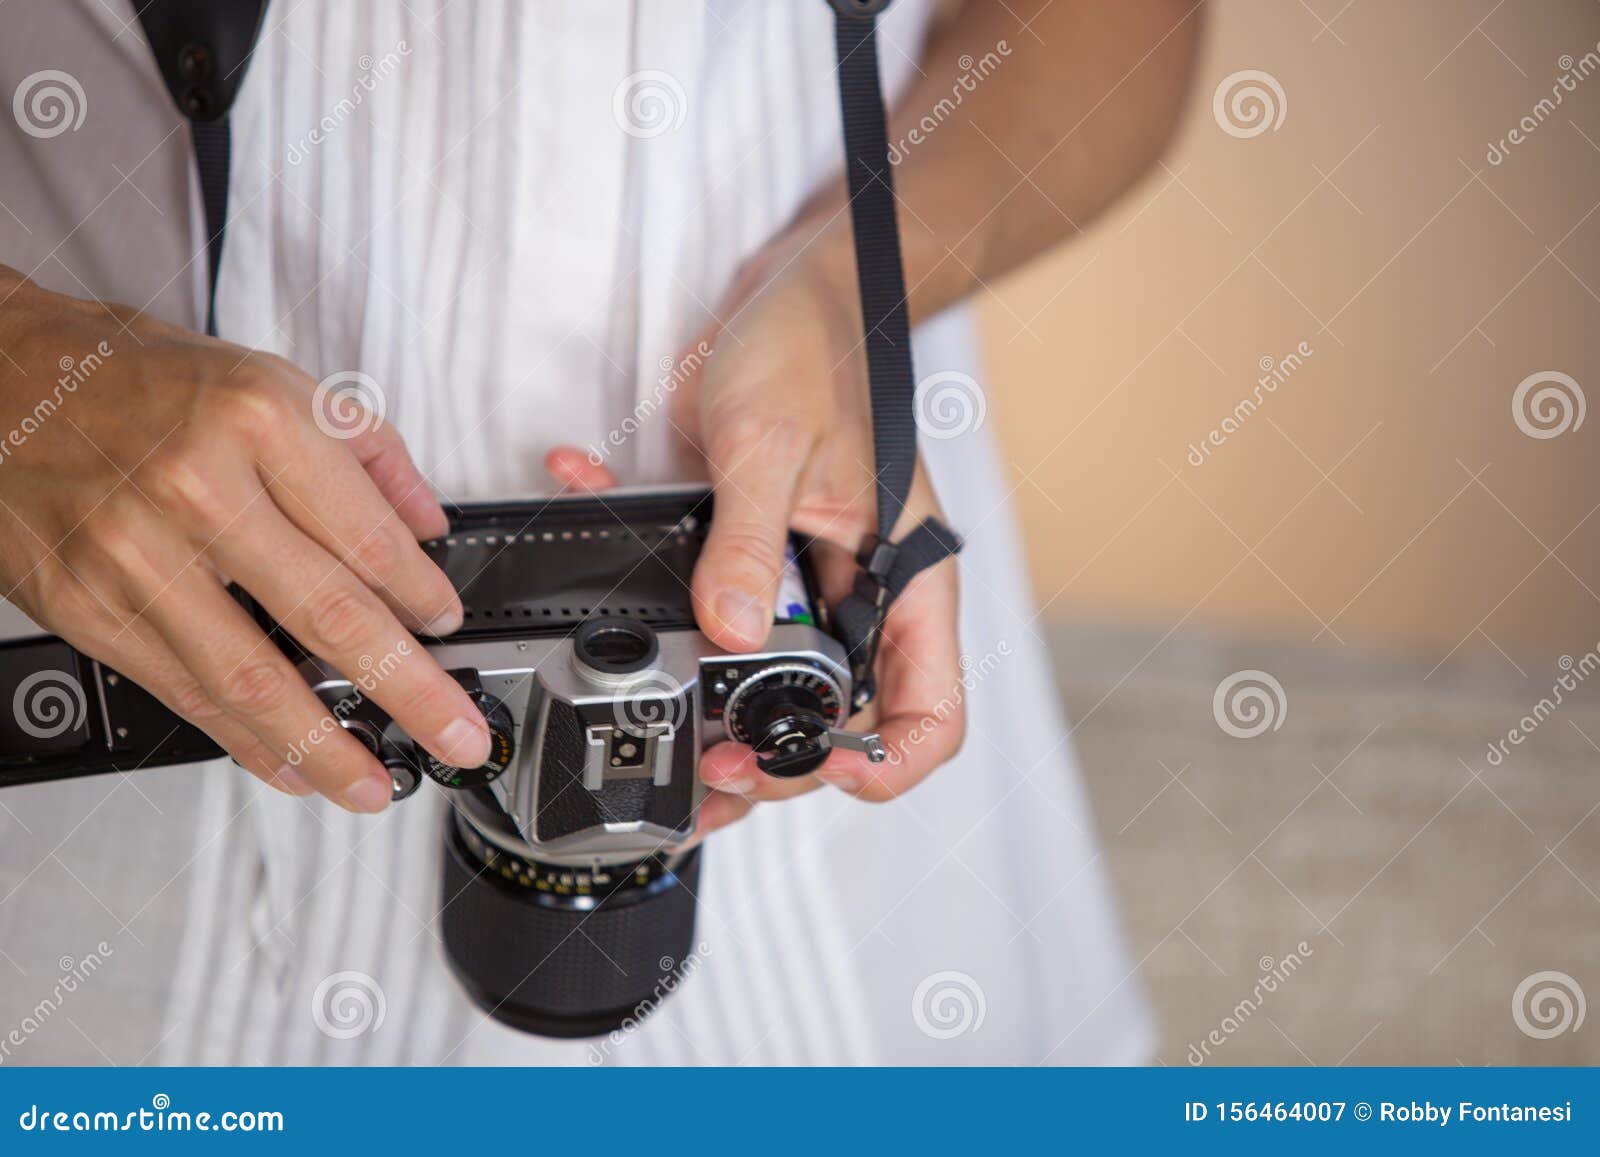 contrast between old and modern times: a young woman with a vintage camera around her neck fiddles with her smartphone